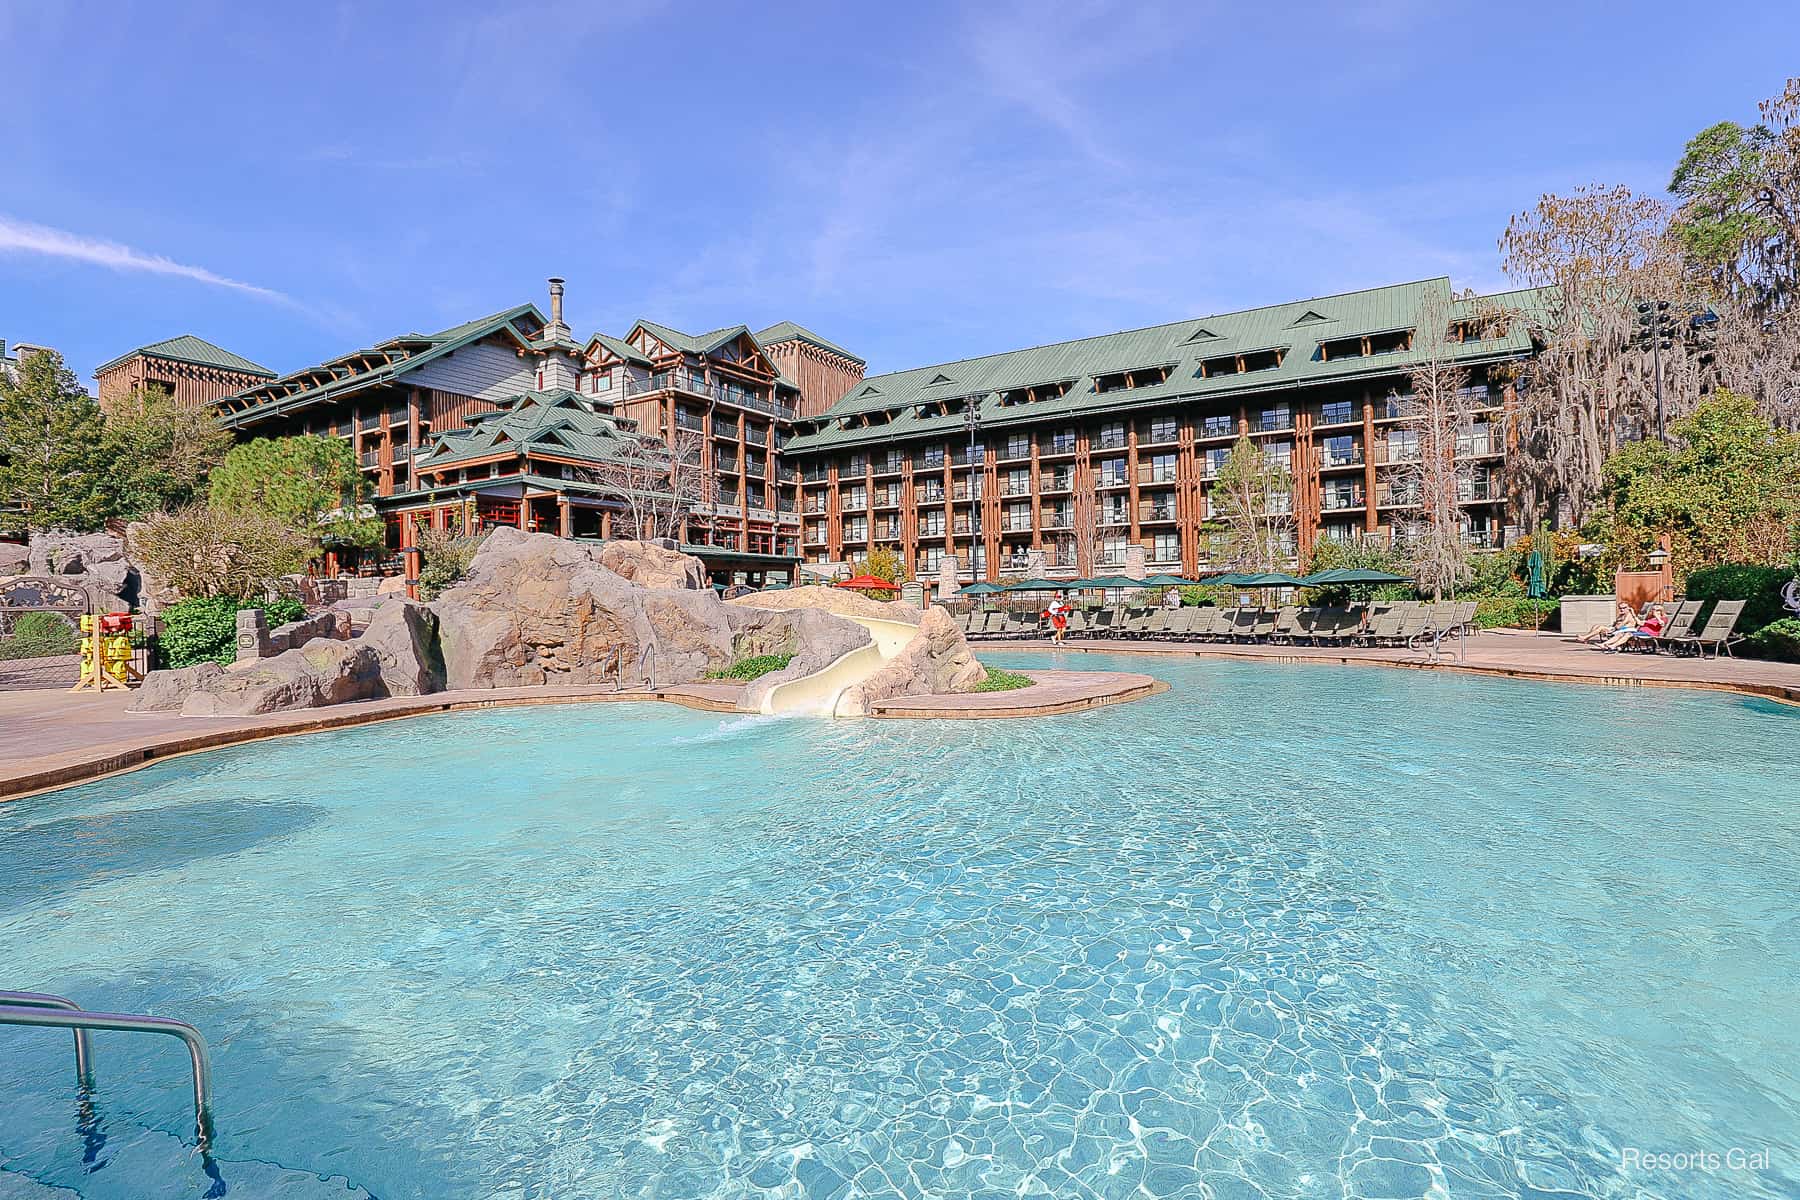 the slide entering the pool at Disney's Wilderness Lodge